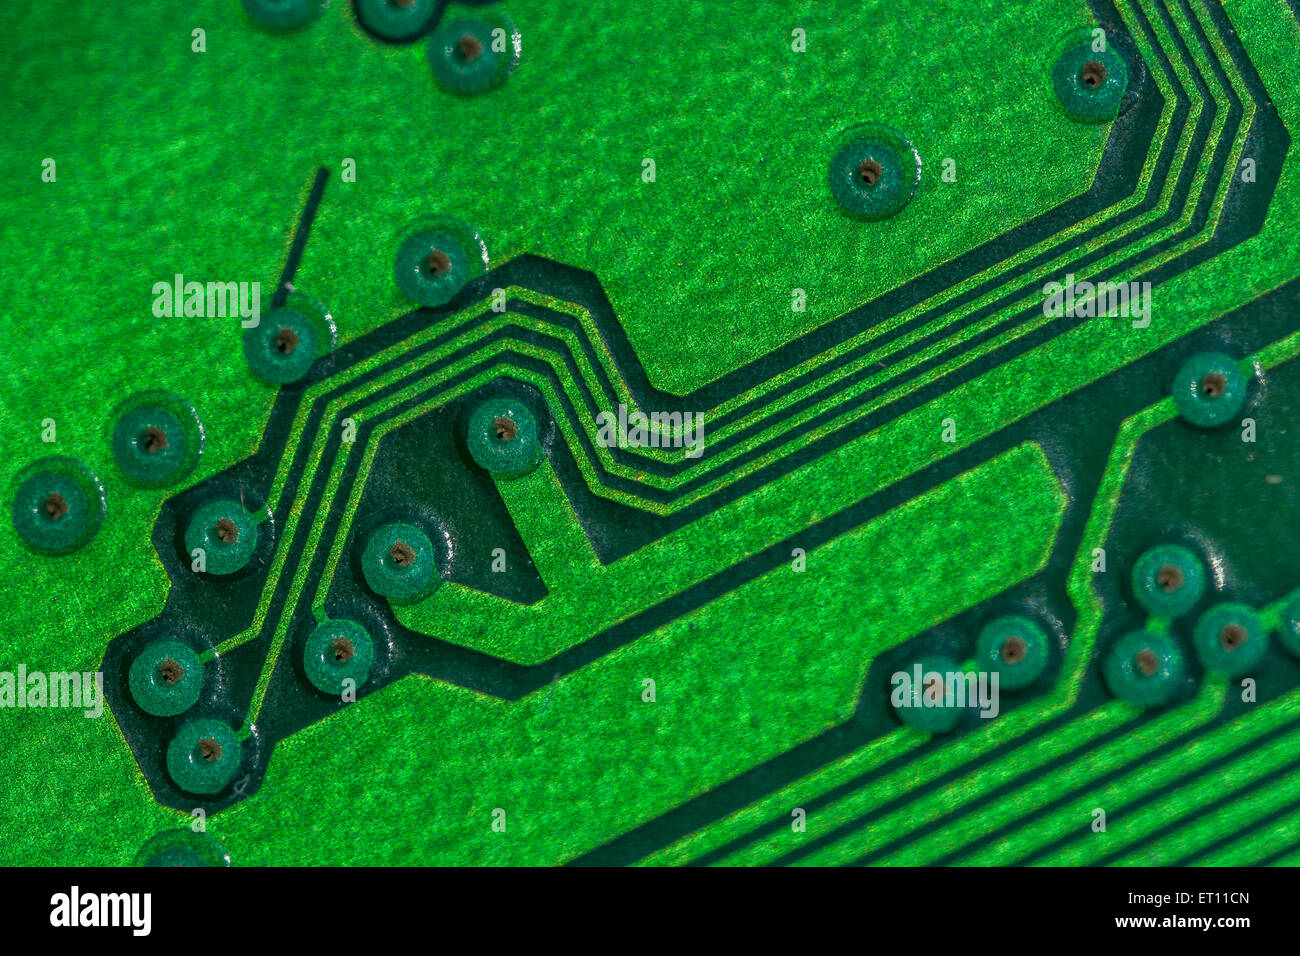 Macro-photo of printed circuit wiring for a PC motherboard. Wiring inside computer, circuit close up, detail of a circuit board, connected points. Stock Photo